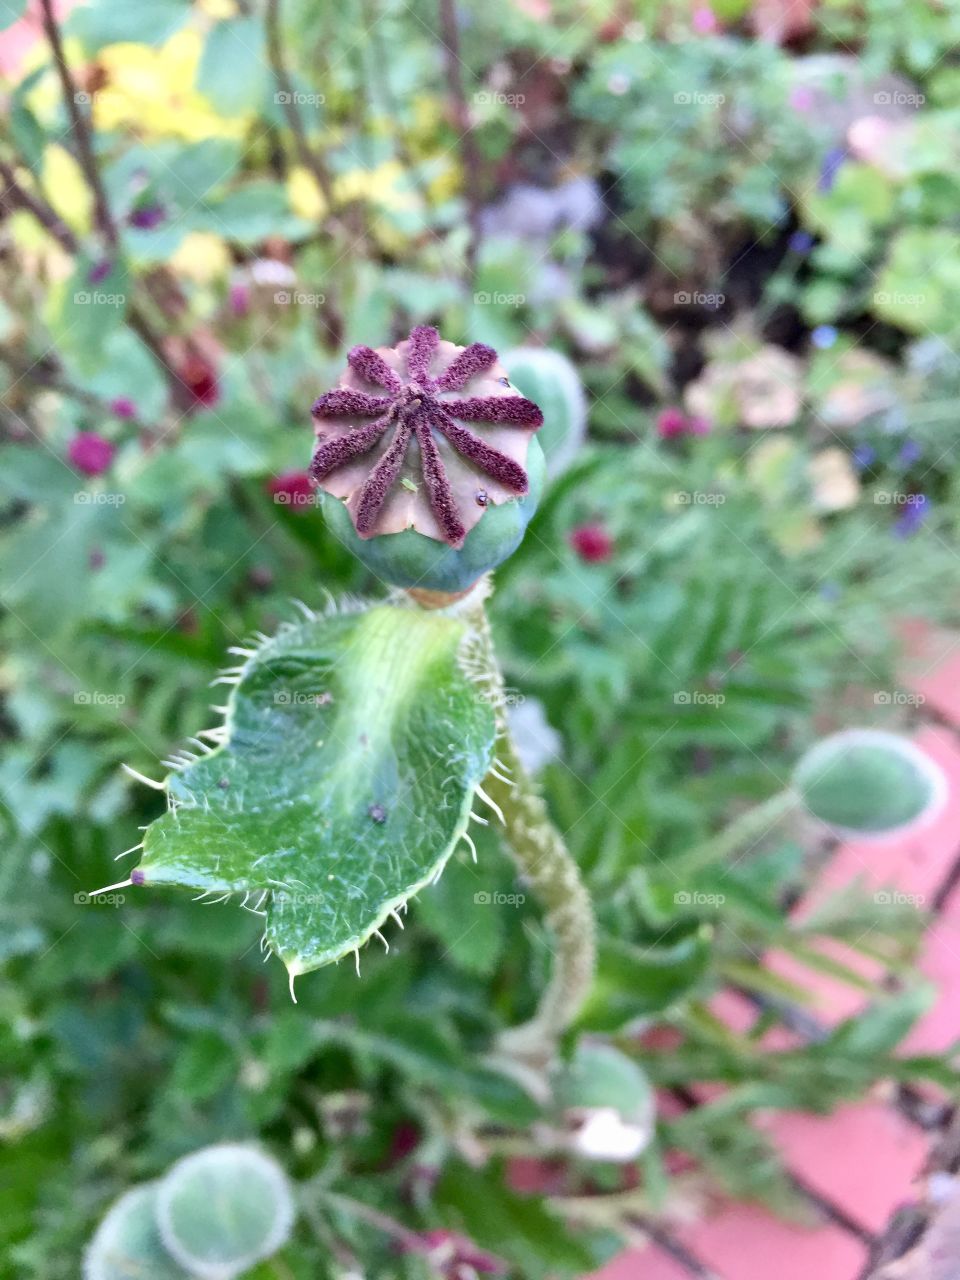 “I will survive”, a white poppy after shedding her petals. She will return stronger next season.